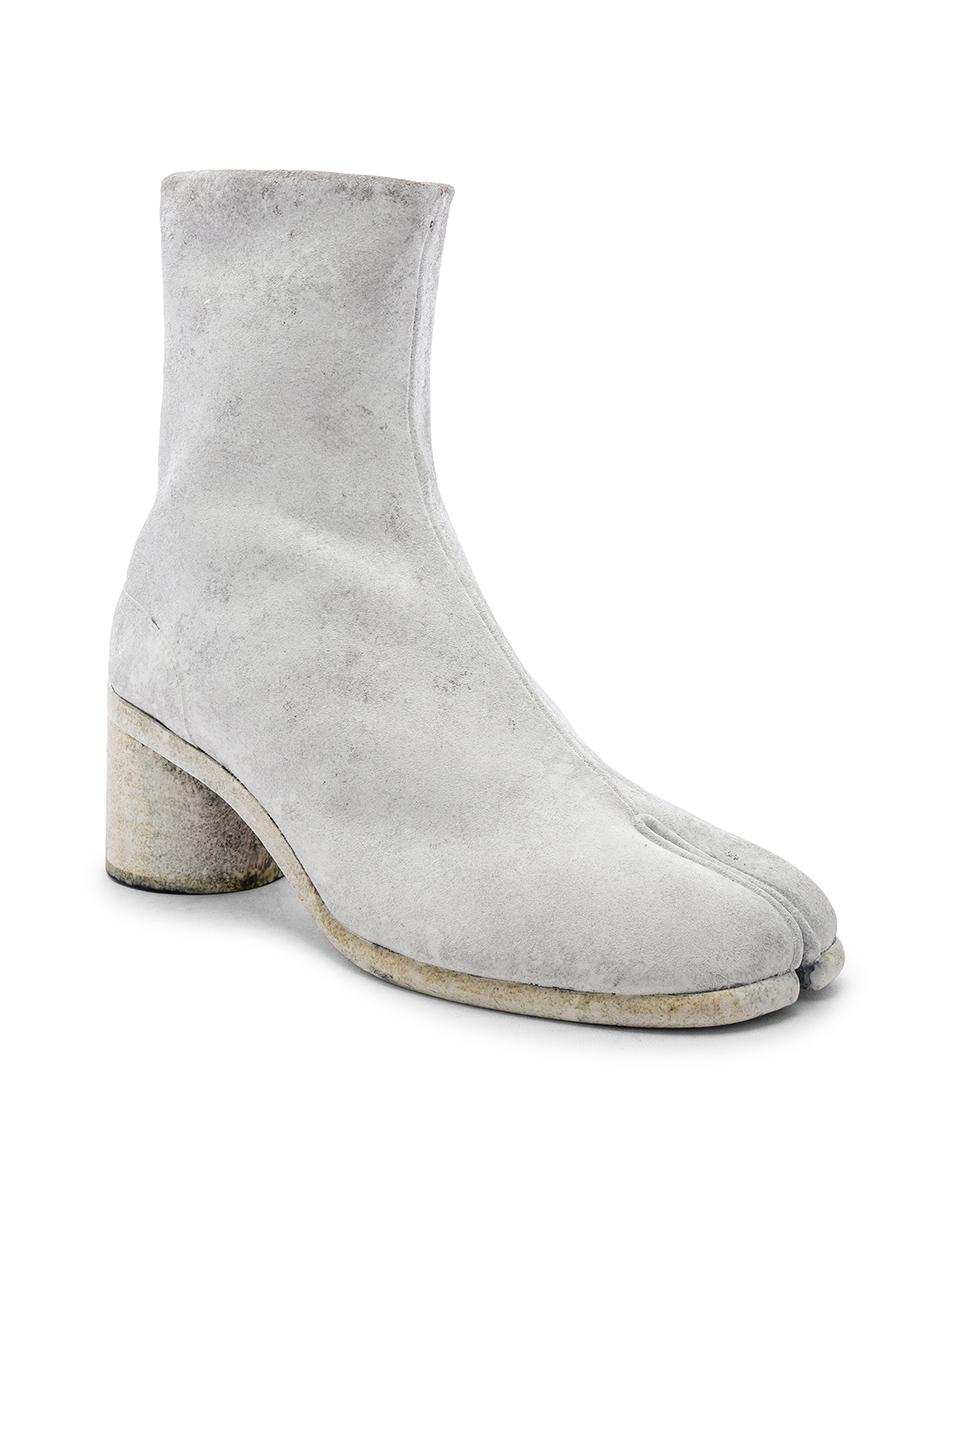 Maison Margiela Leather Tabi Boot in Grey (Gray) for Men - Save 35% - Lyst